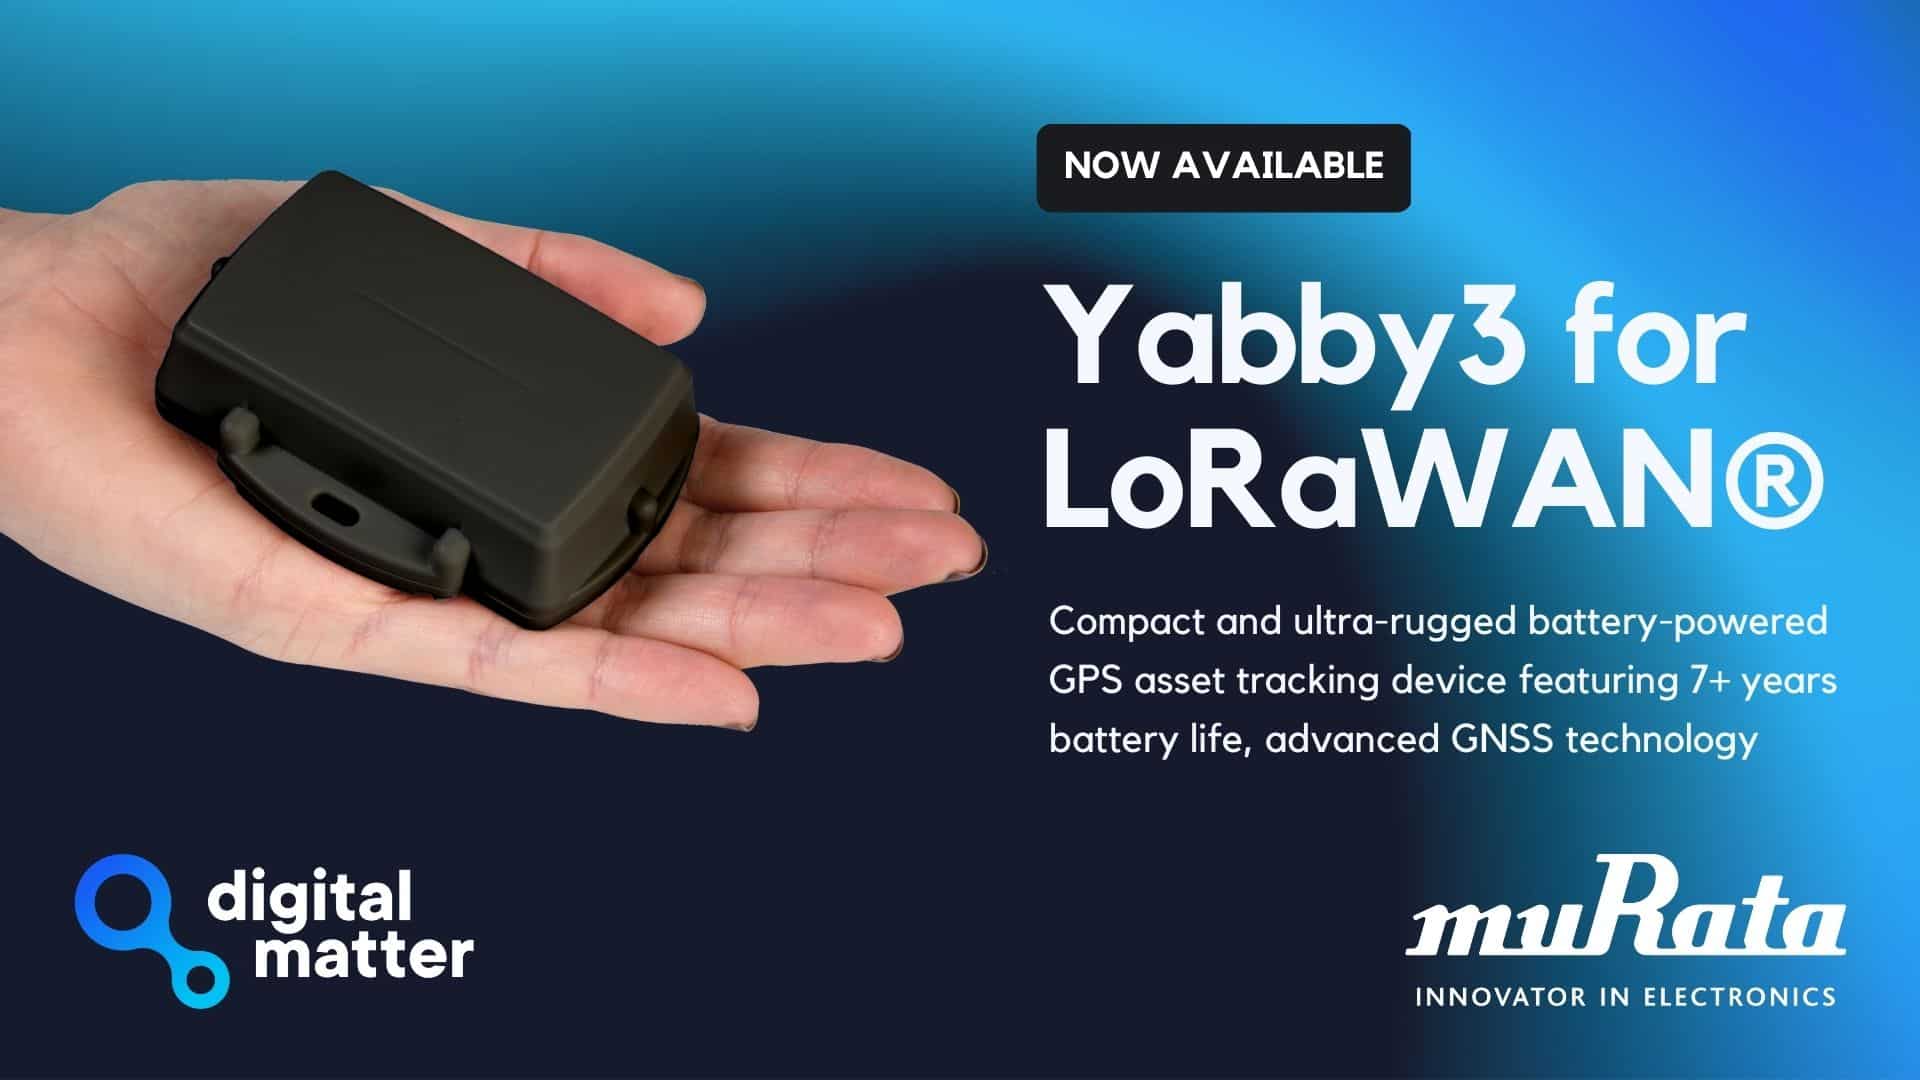 Yabby3 GPS for LoRaWAN® Now Available